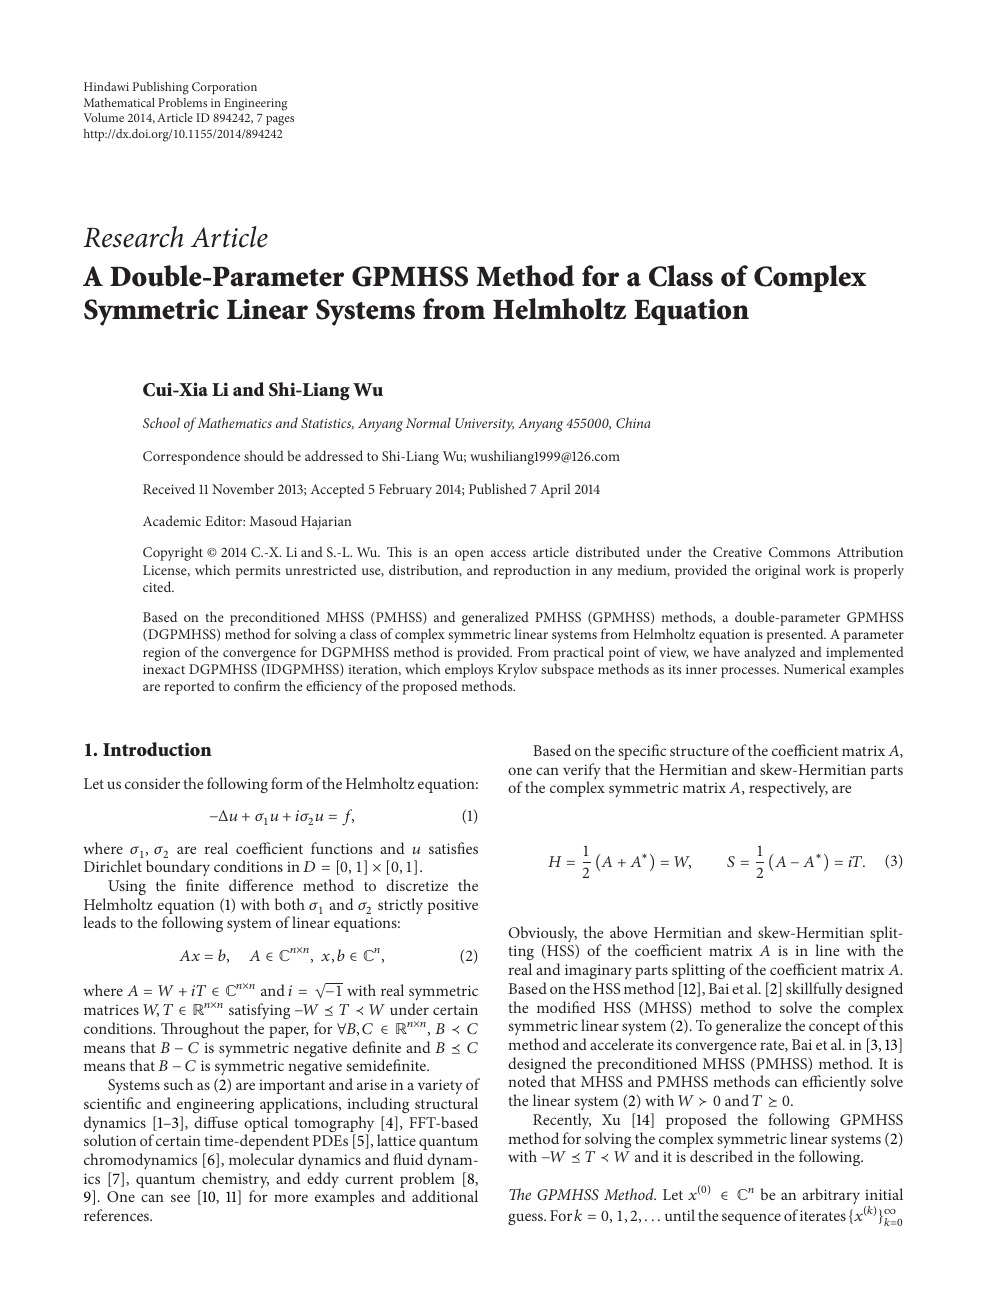 A Double Parameter Gpmhss Method For A Class Of Complex Symmetric Linear Systems From Helmholtz Equation Topic Of Research Paper In Mathematics Download Scholarly Article Pdf And Read For Free On Cyberleninka